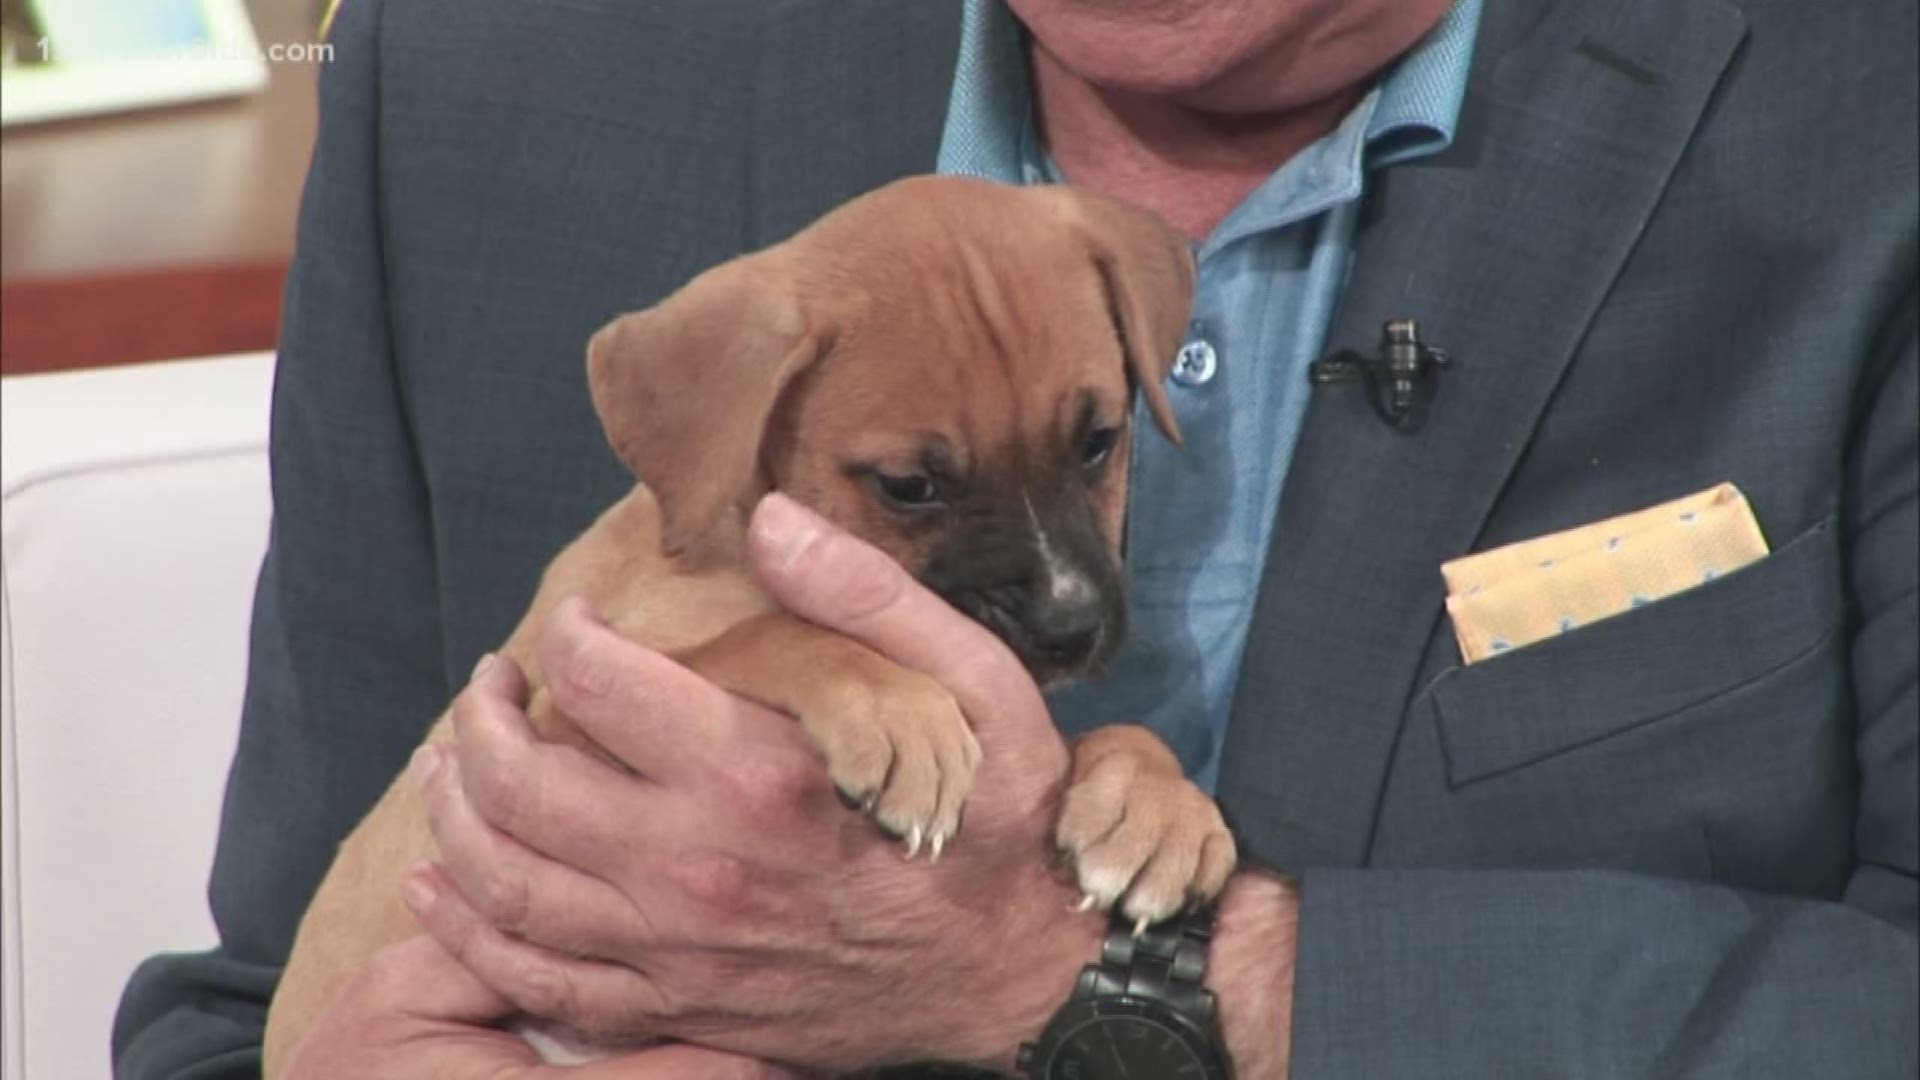 Meet Peaches and Cinnamon, two fur-babies looking for a family to call their own! Peach is a 2-month-old female American Pit Bull Terrier mix. Cinnamon is actually a Havana Brown mix, which is a pretty rare breed of cat!